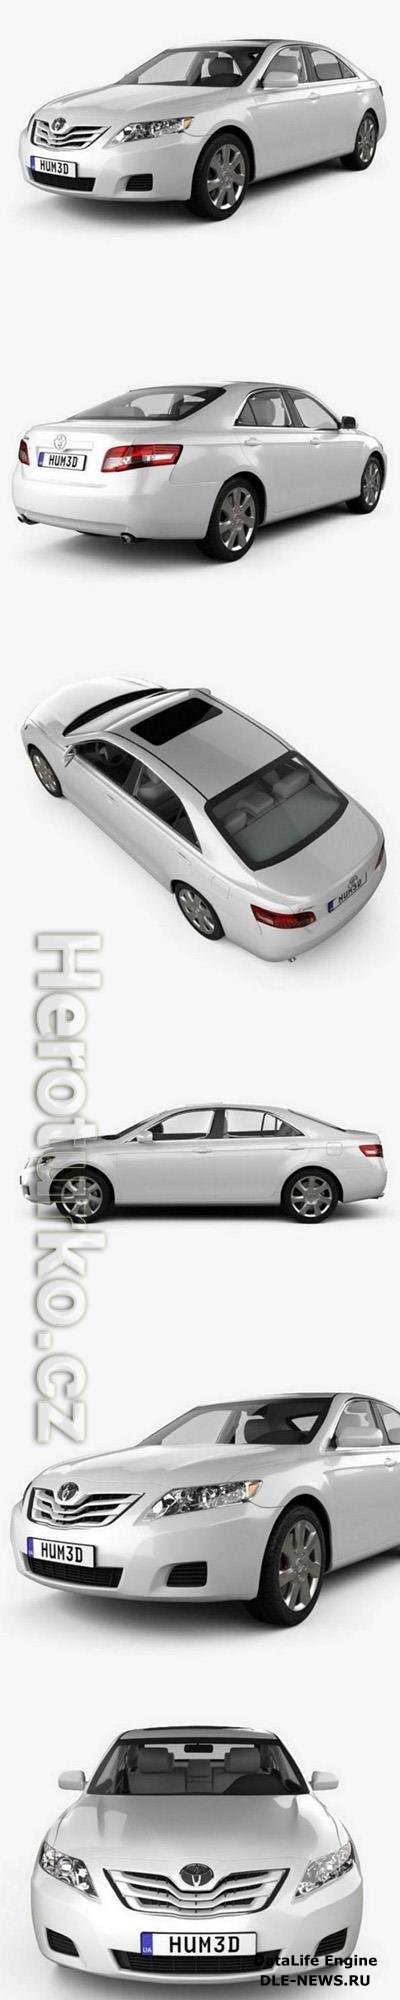 Toyota Camry LE 2010 3D Model